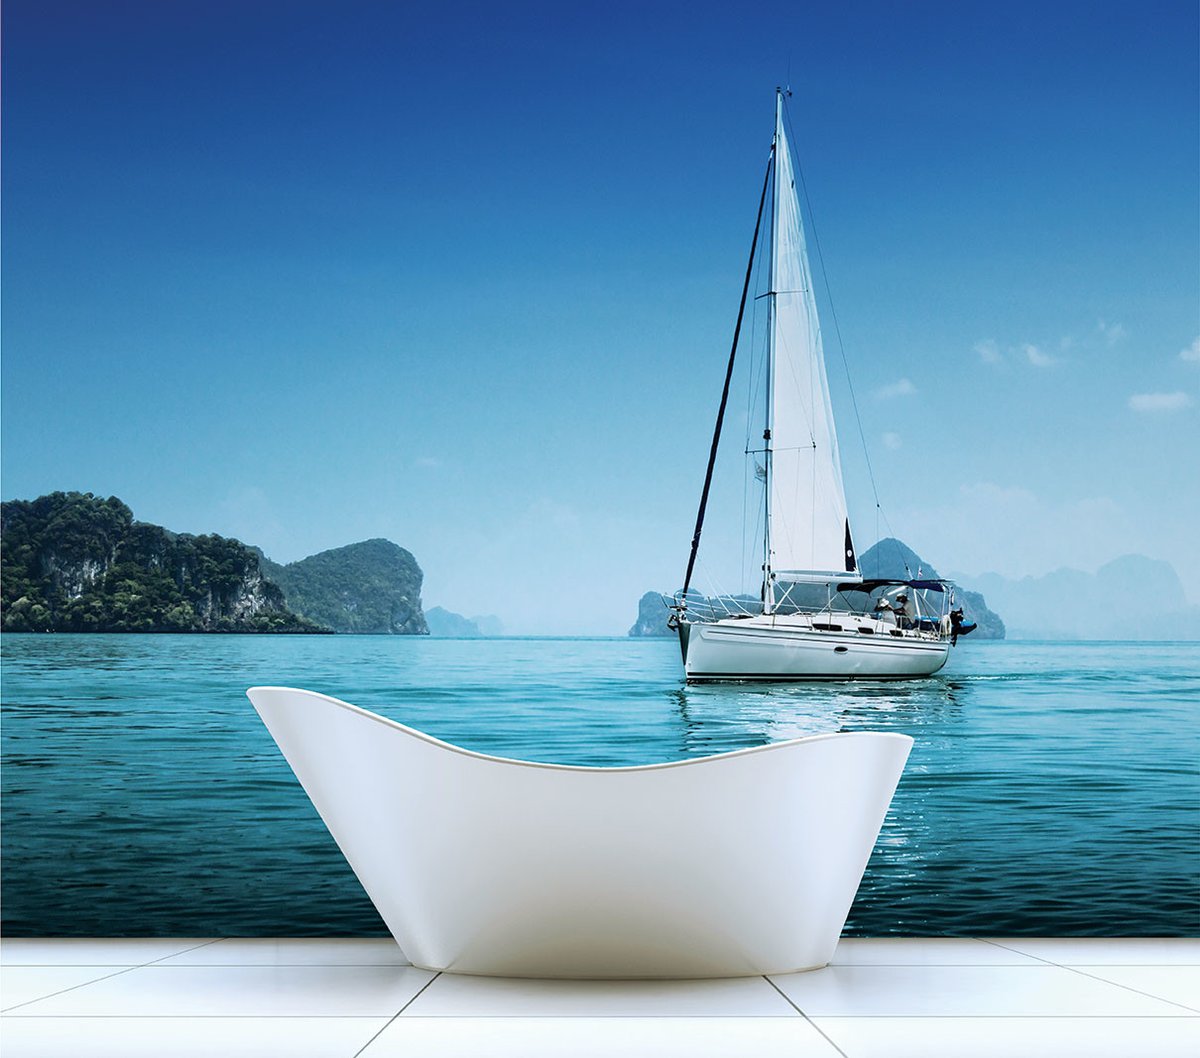 Does a calm sea inspired you? Imaging bathing in this blue sea? 
Yacht Global Fusion Mural G45271
: 
#wallpaperpeeps #thewallpaperpeople #decor #wallpaperlove #featurewall #wallcovering #Wallpaper #GalerieWallpaper #GlobalFusion 
: 
bit.ly/2CIo9ps